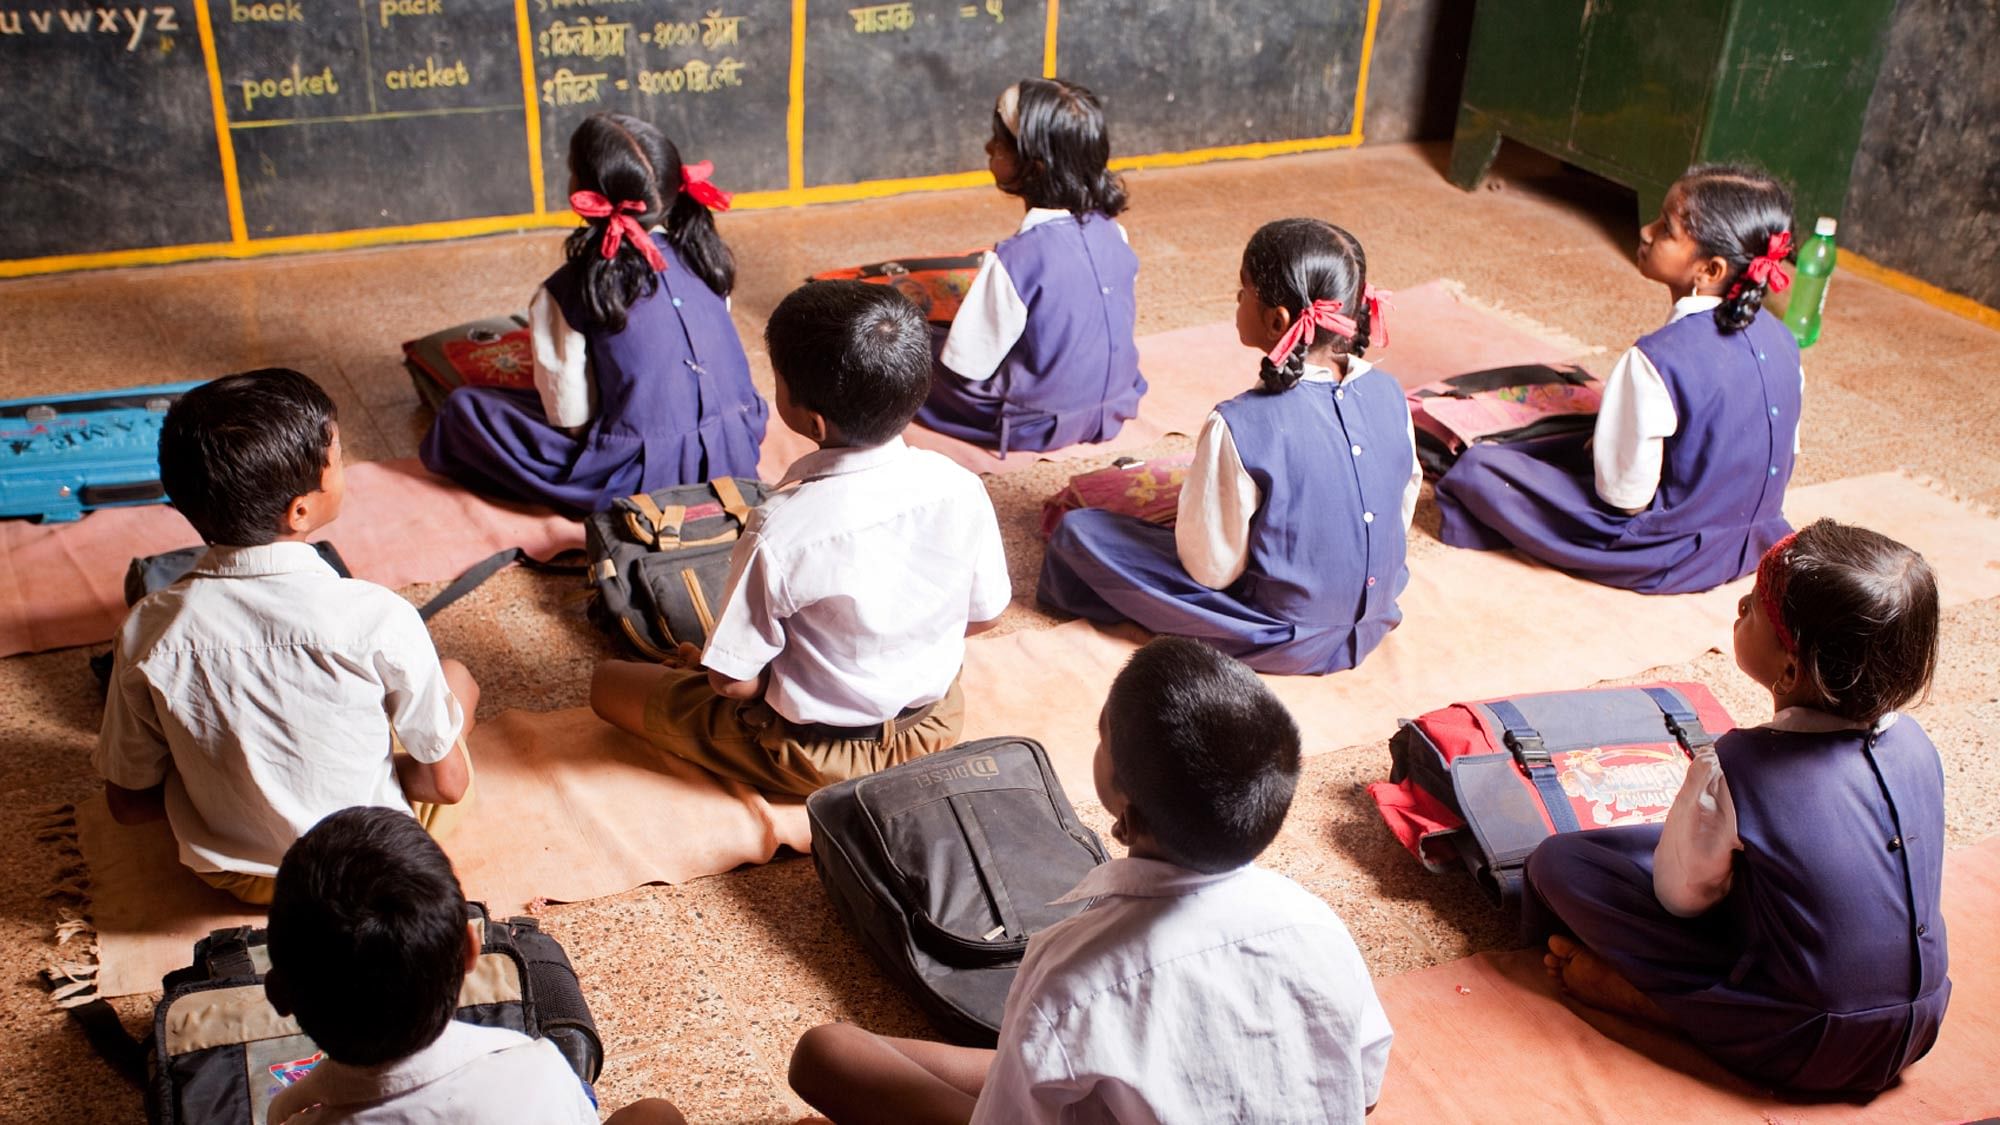 Caste is still a pervasive reality in the schools of Tirunelveli, Tamil Nadu. Photograph used for representational purpose. (Photo: iStockphoto)